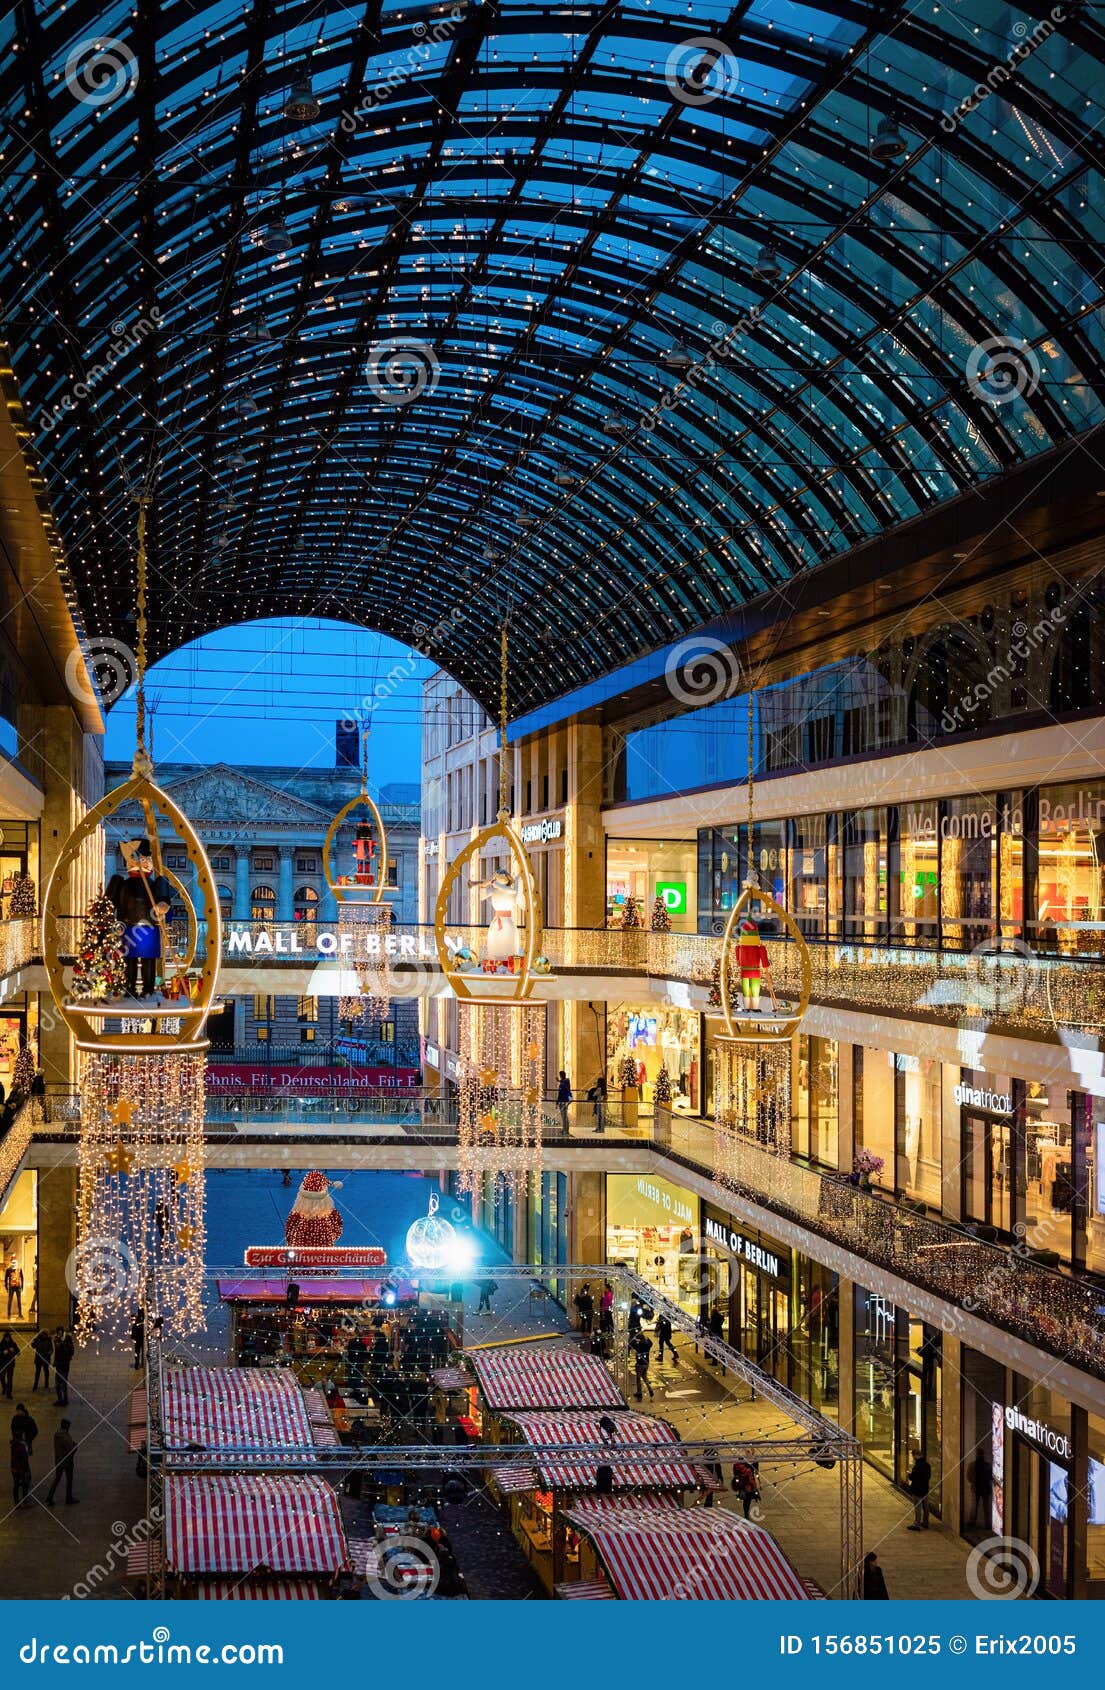 Mall Of Berlin Decorated Christmas And New Year Berlin Editorial Image - Image of german, kiosk ...